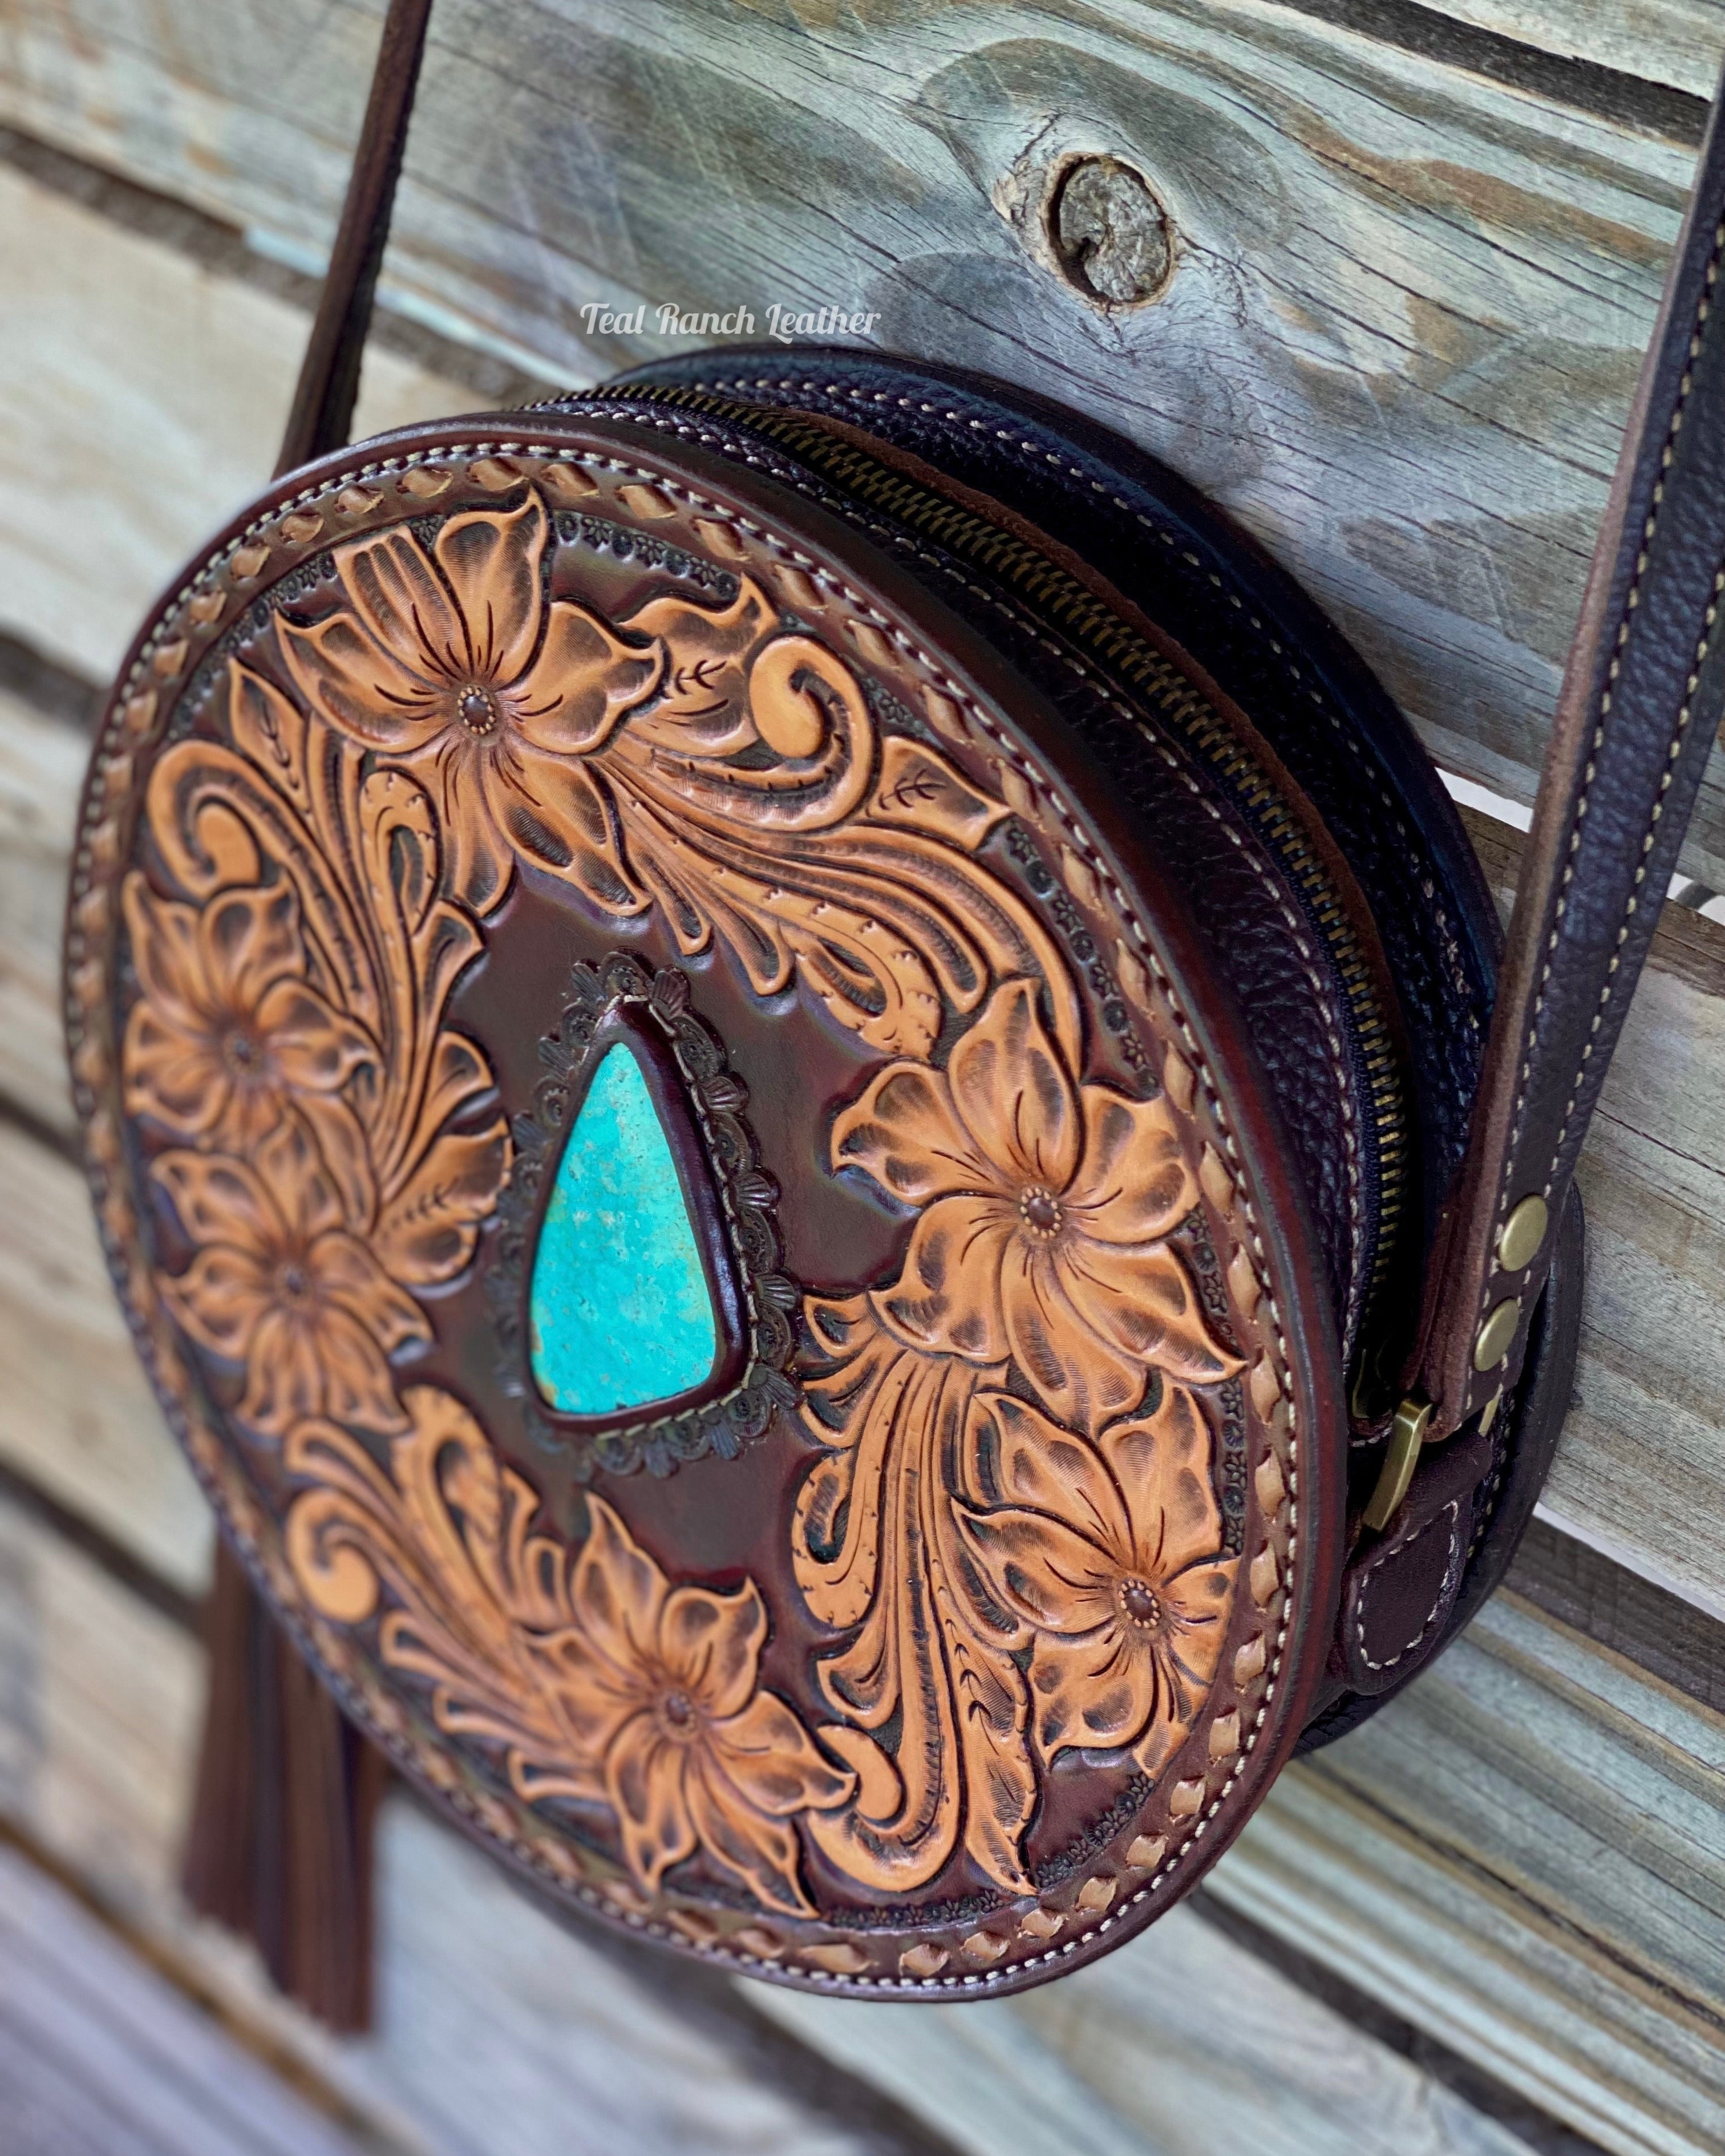 Tooled leather round purse - floral tooling – Teal Ranch Leather